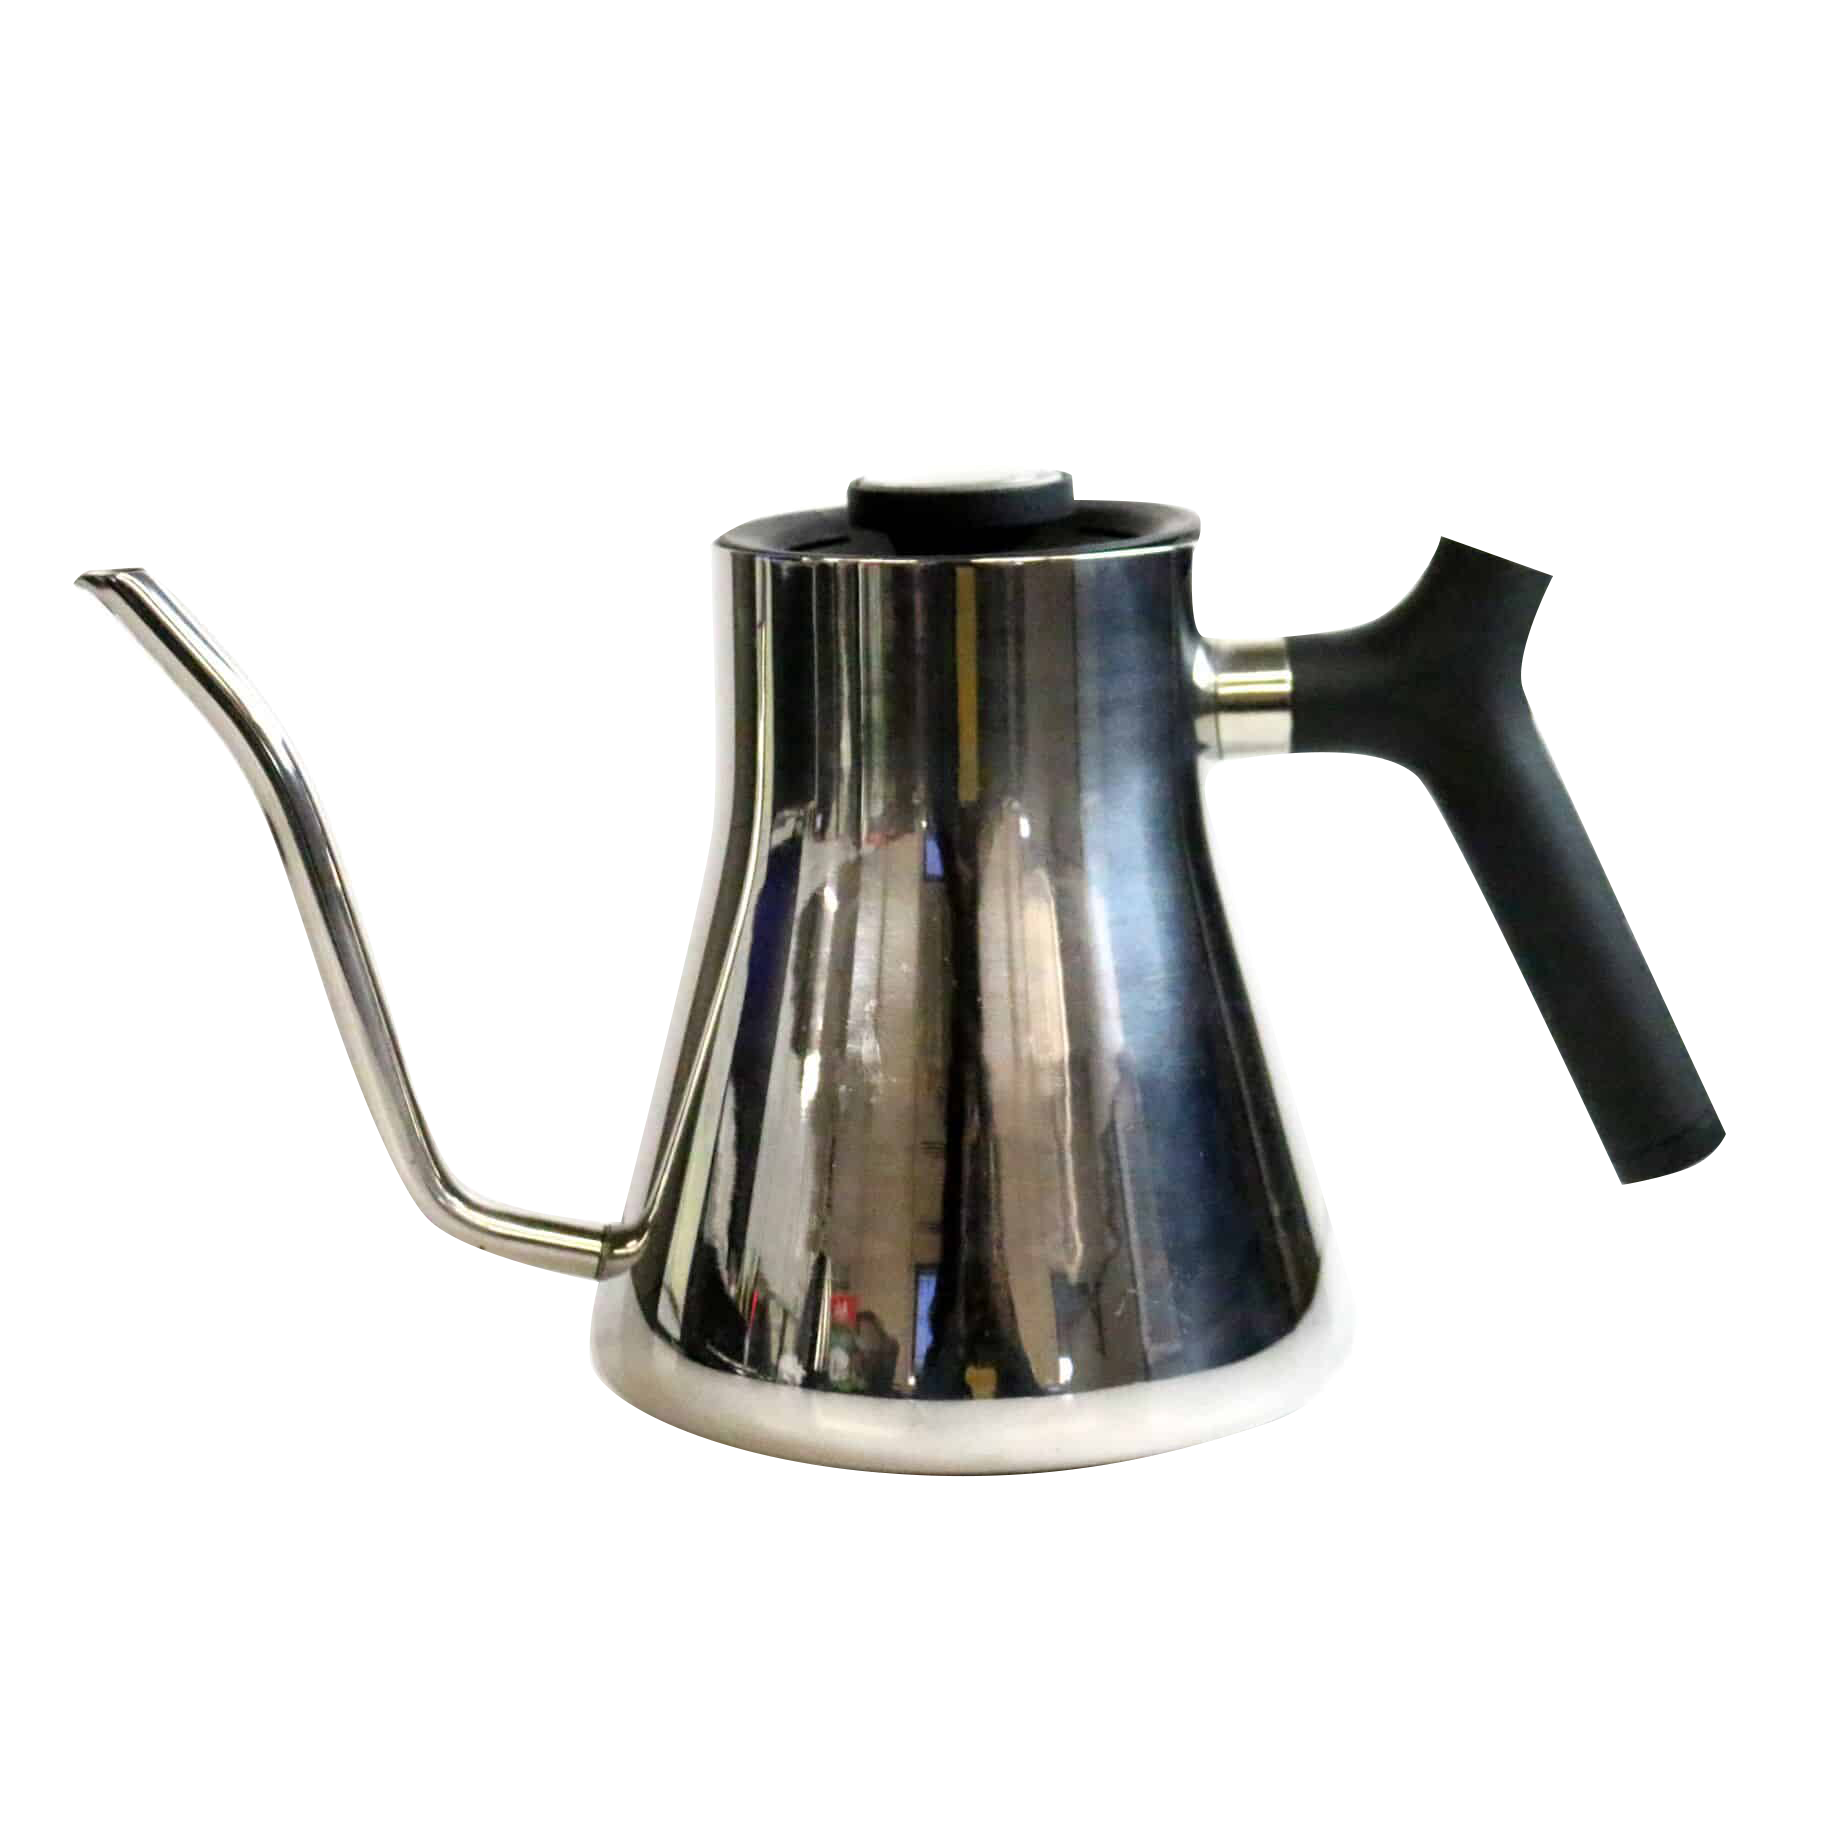 https://cdn.shopify.com/s/files/1/0563/3294/3550/products/Staggchromekettle.png?v=1629844848